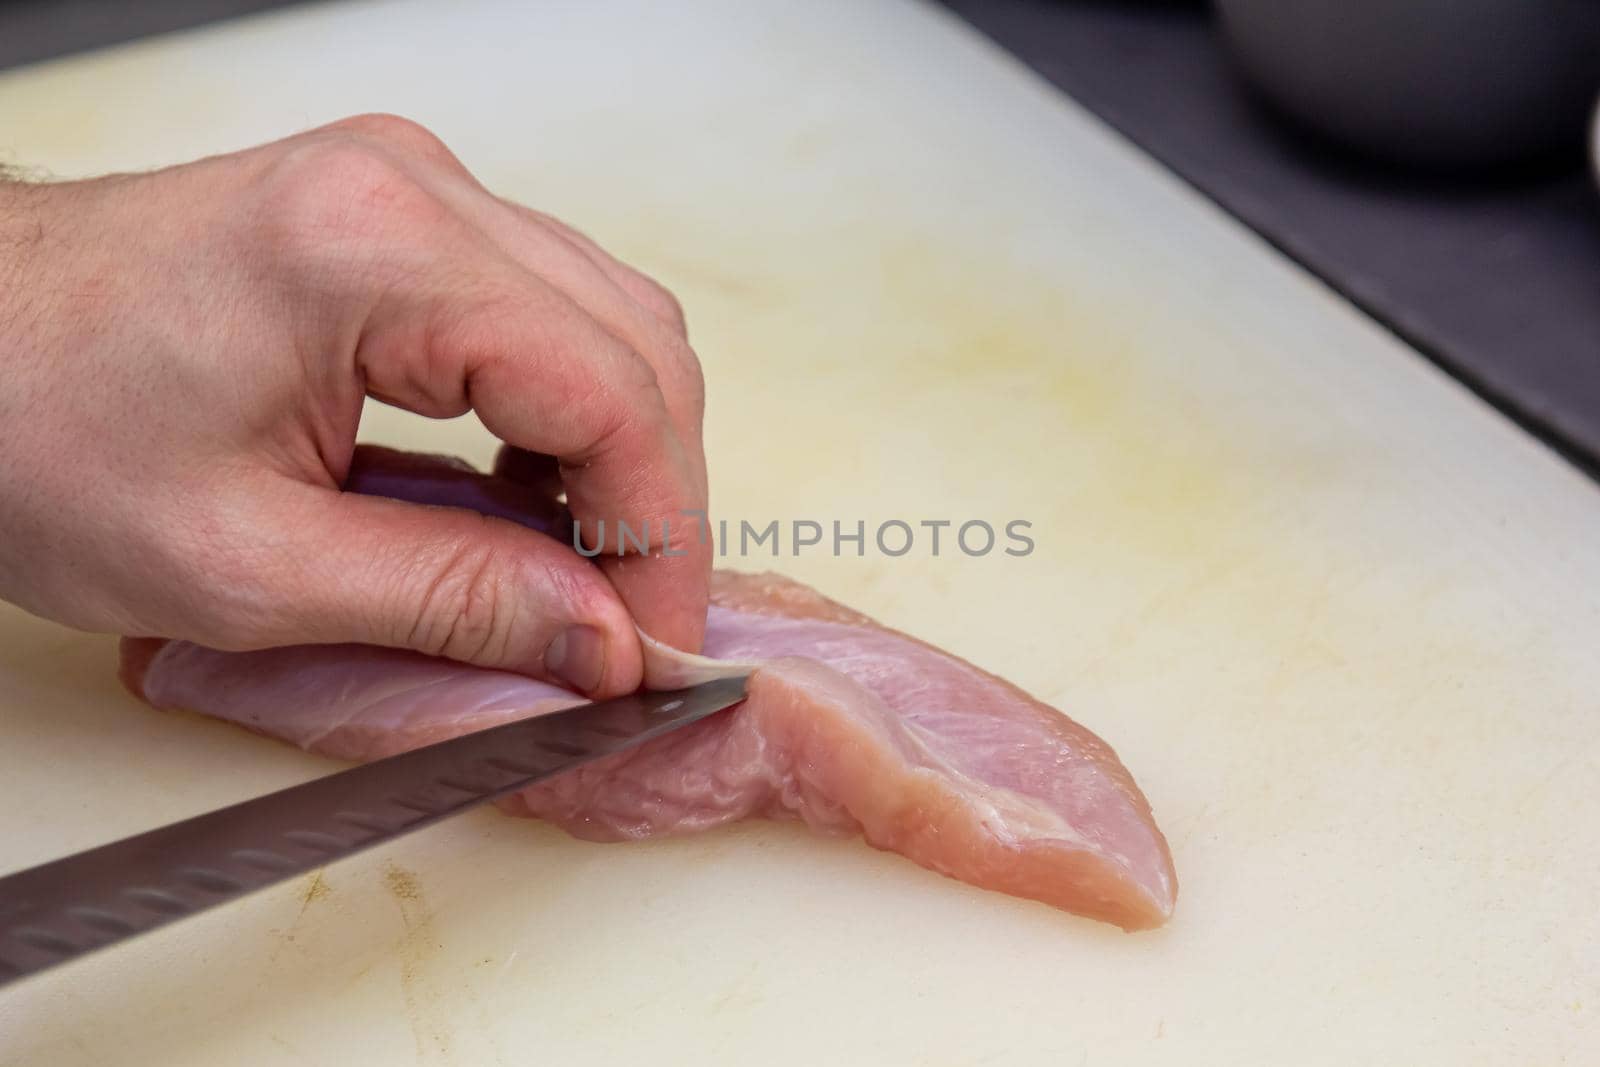 The cook cuts a chicken breast with a knife on a white board.